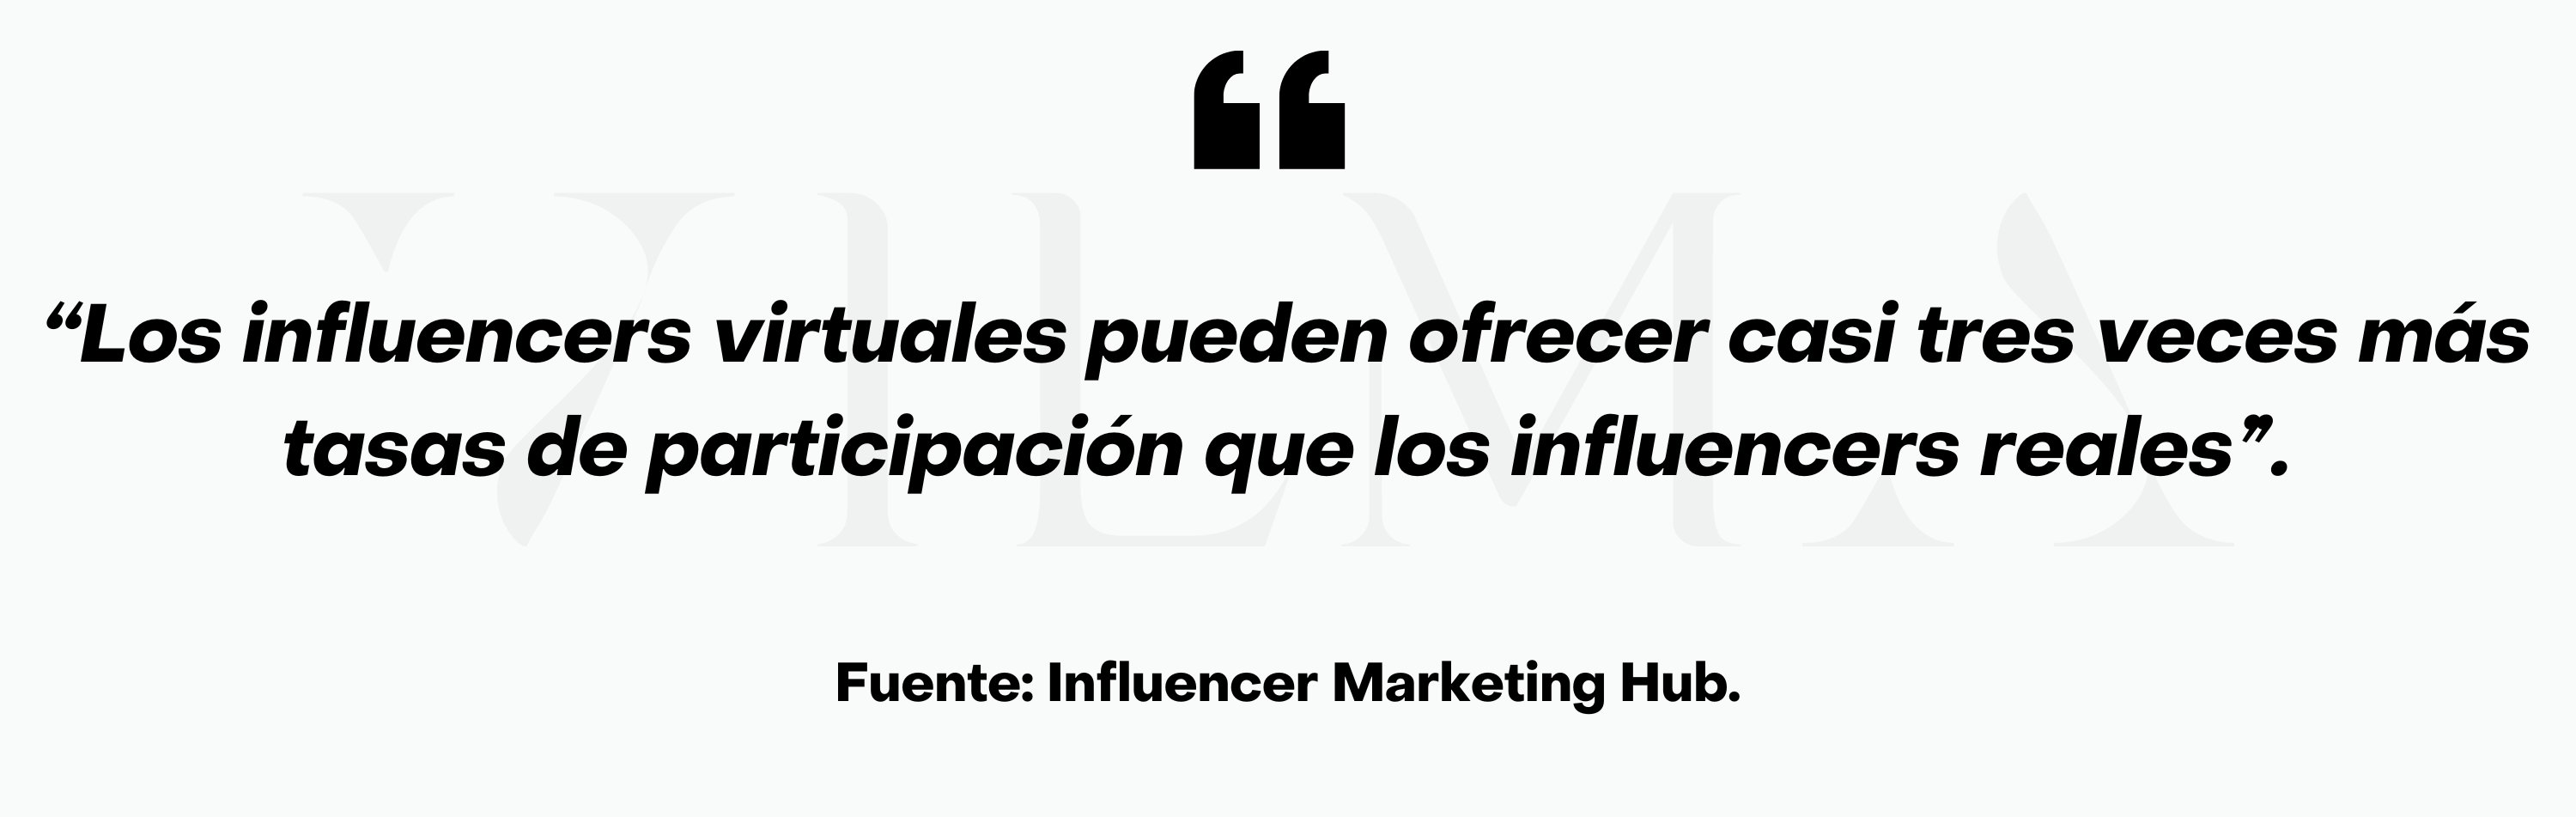 influencers virtuales